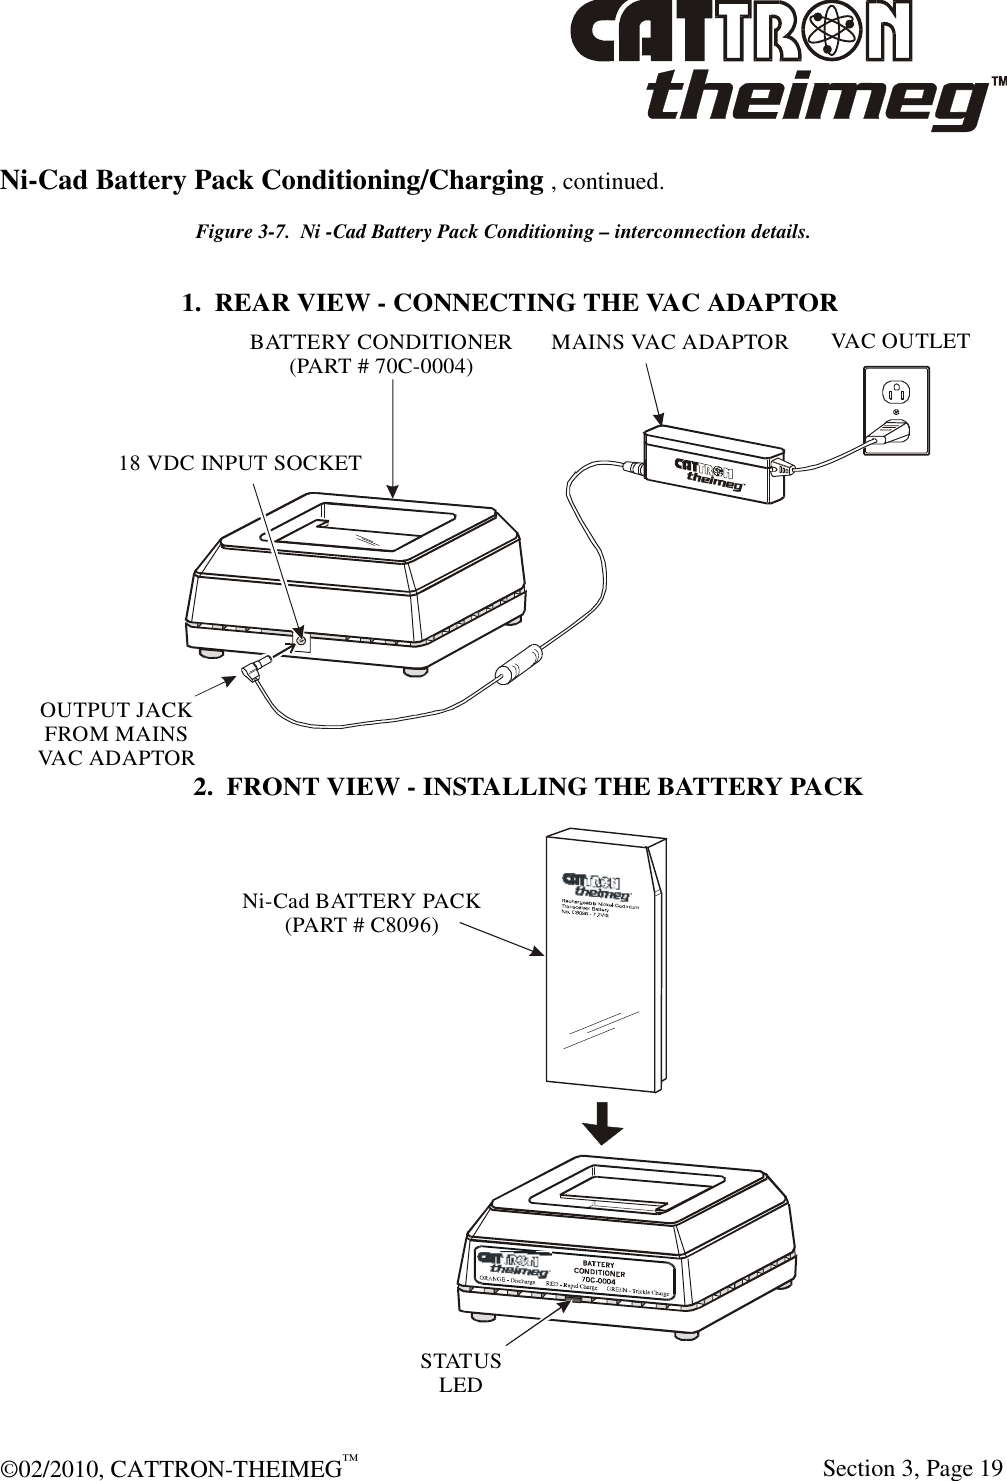  ©02/2010, CATTRON-THEIMEG™     Section 3, Page 19 Ni-Cad Battery Pack Conditioning/Charging , continued. Figure 3-7.  Ni -Cad Battery Pack Conditioning – interconnection details. 1.  REAR VIEW - CONNECTING THE VAC ADAPTOR2.  FRONT VIEW - INSTALLING THE BATTERY PACKOUTPUT JACKFROM MAINSVAC ADAPTORMAINS VAC ADAPTORVAC OUTLET18 VDC INPUT SOCKETBATTERY CONDITIONER(PART # 70C-0004)STATUSLEDNi-Cad BATTERY PACK(PART # C8096)  